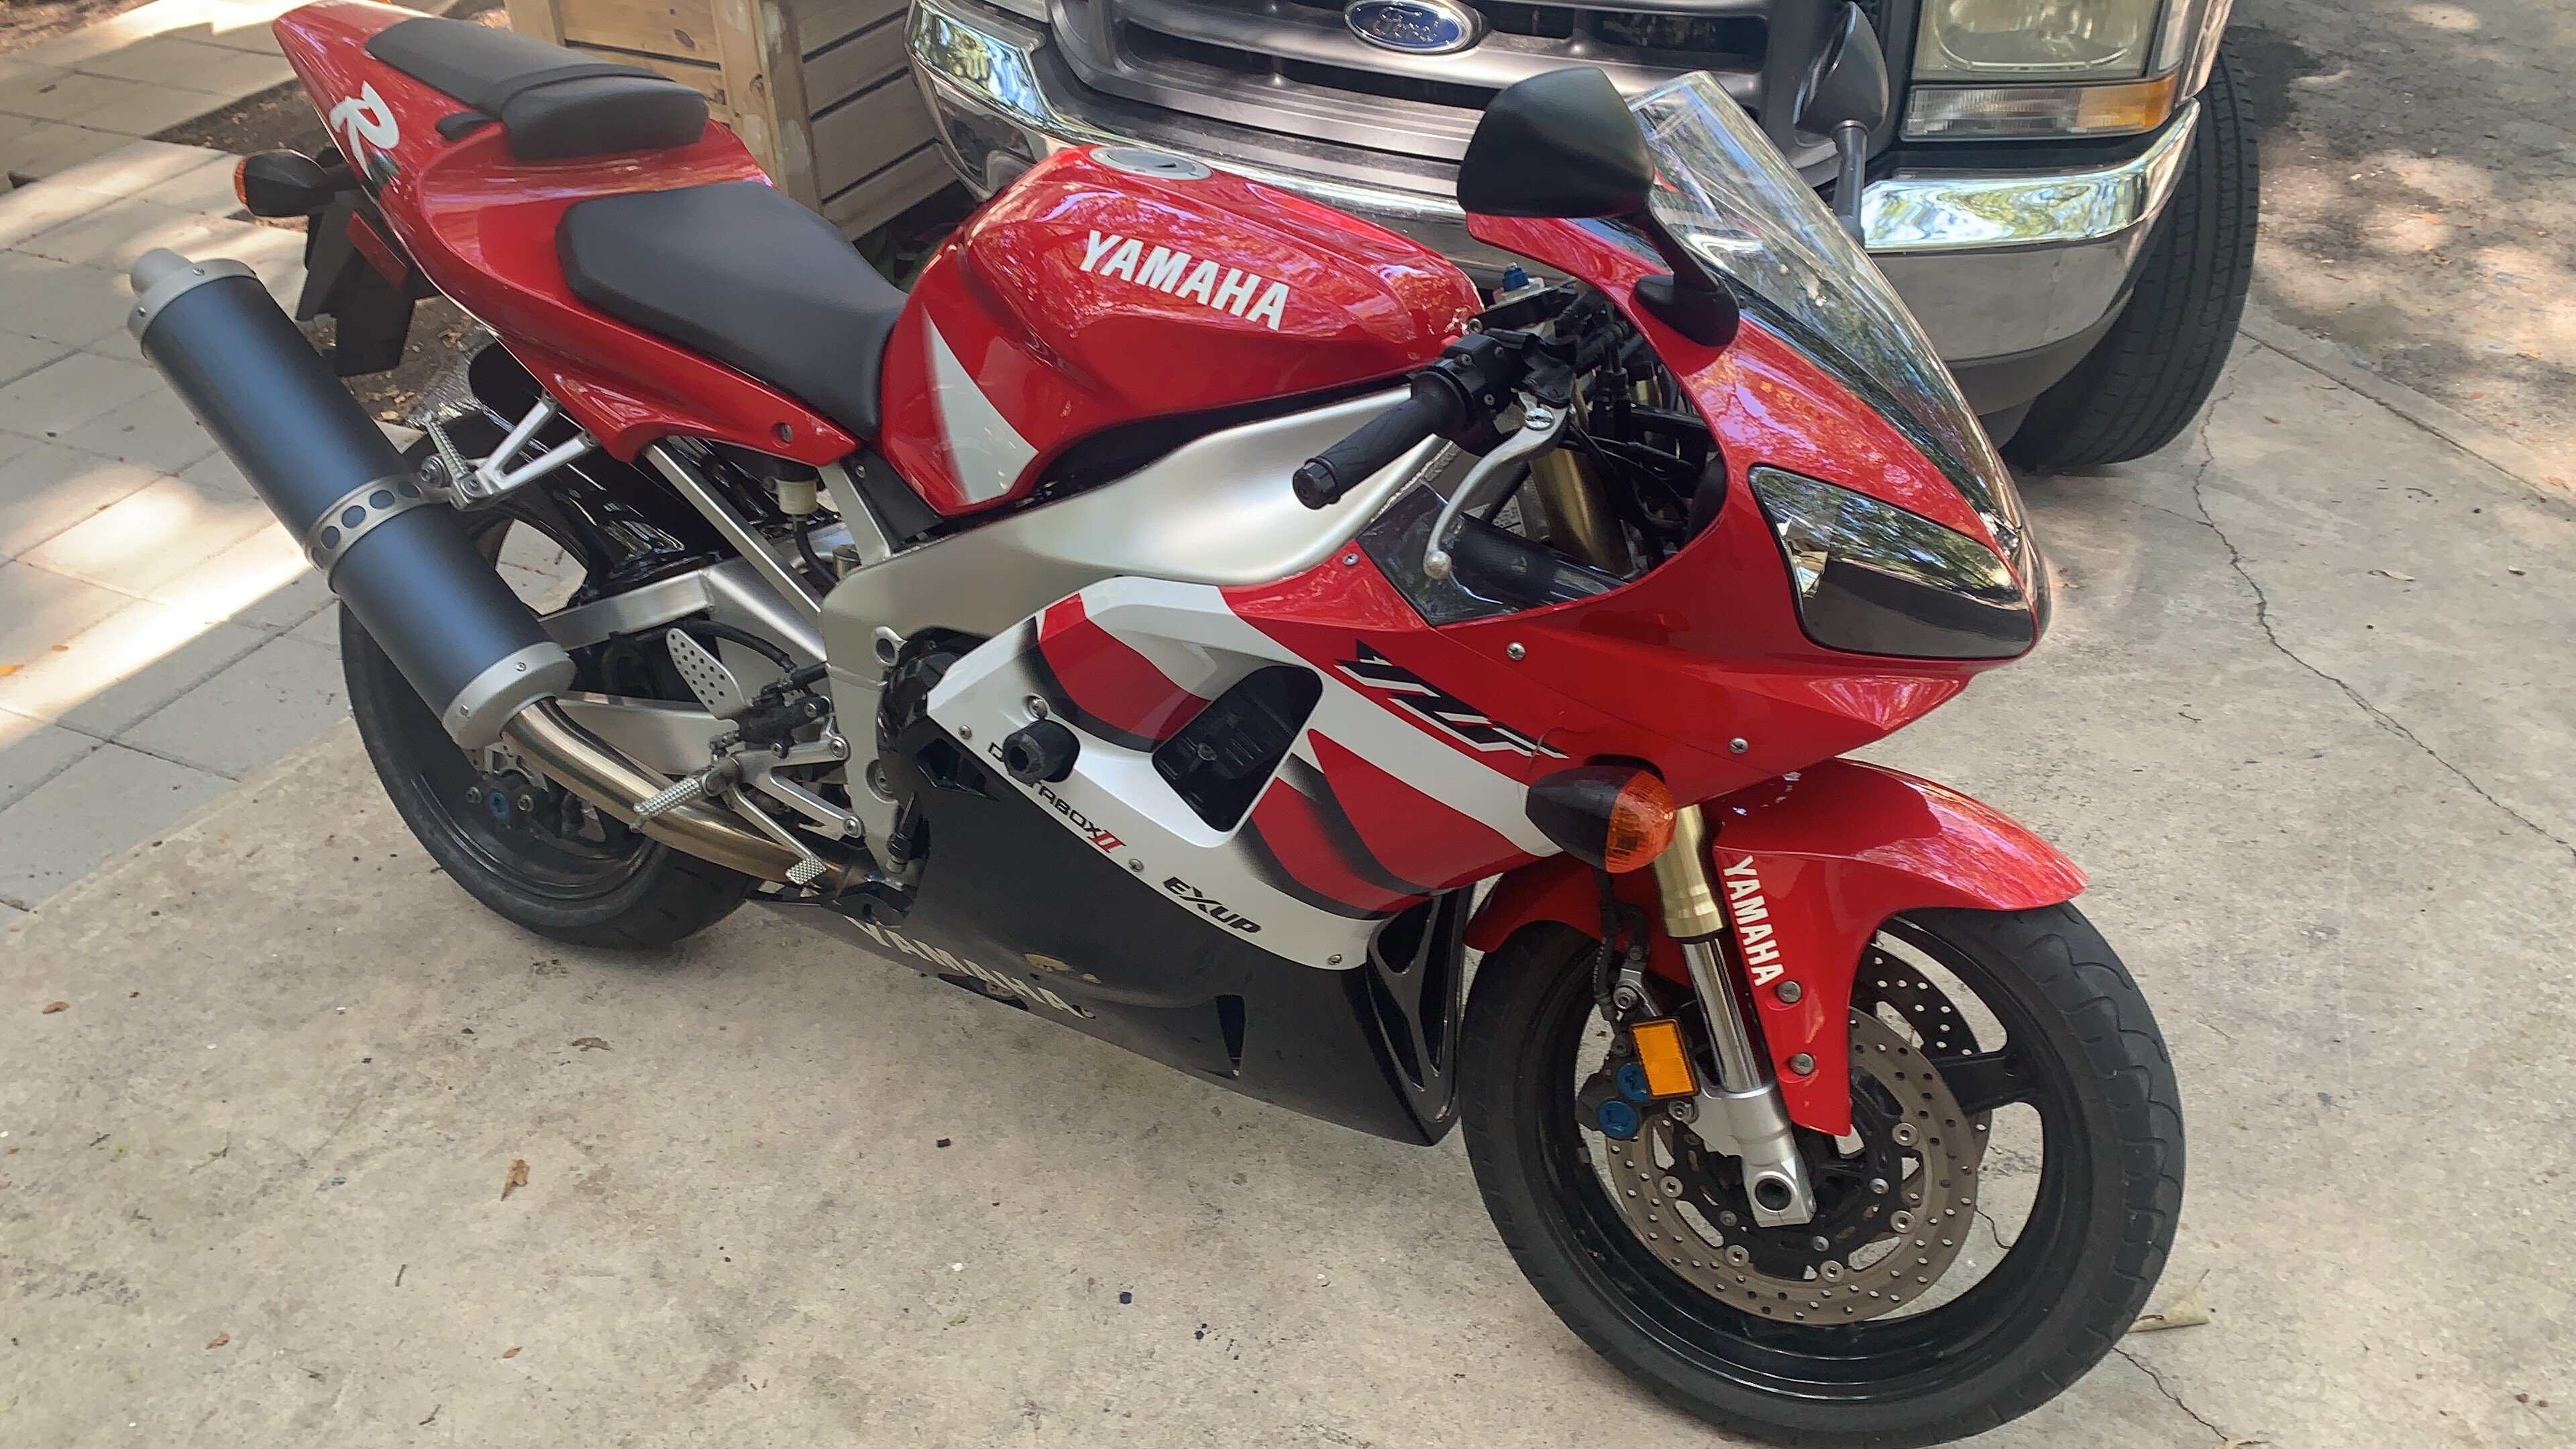 Honda CBR929RR Motorcycles for Sale - Motorcycles on 